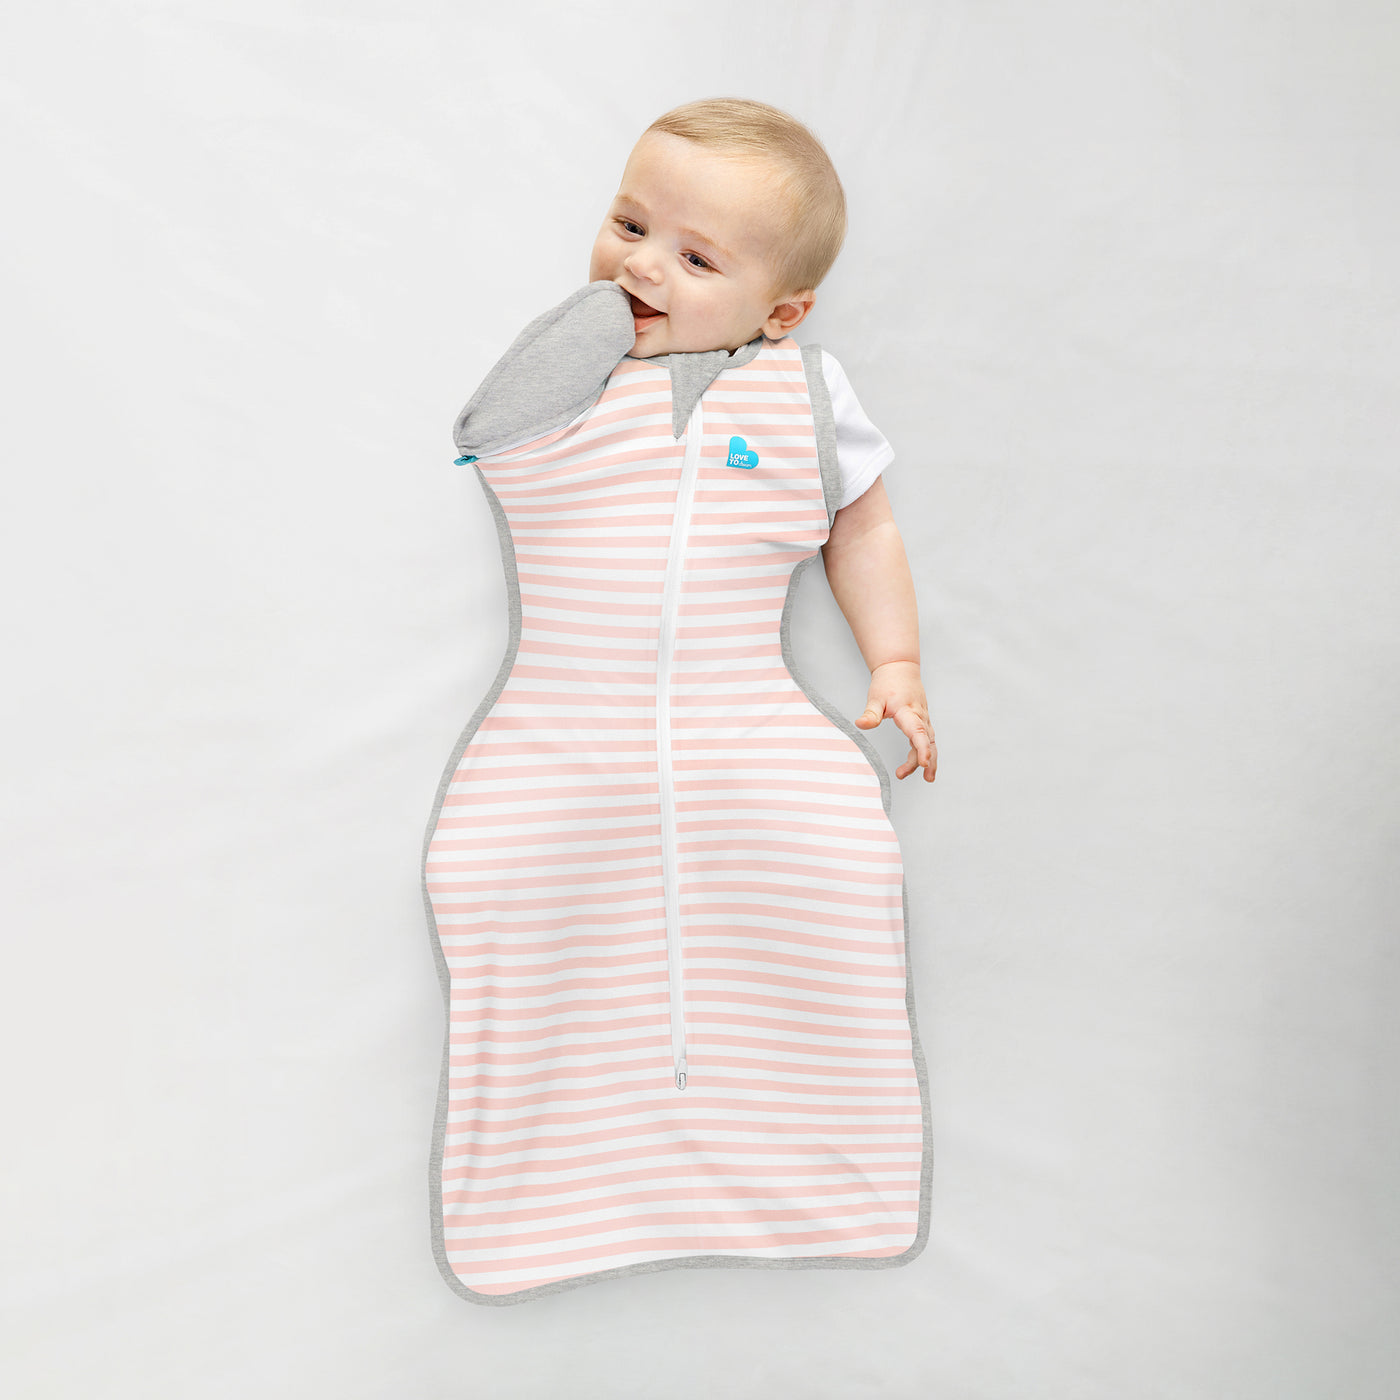 Swaddle Up™ Transition Bag 1.0 TOG - Dusty Pink - Love to Dream™ NZ 